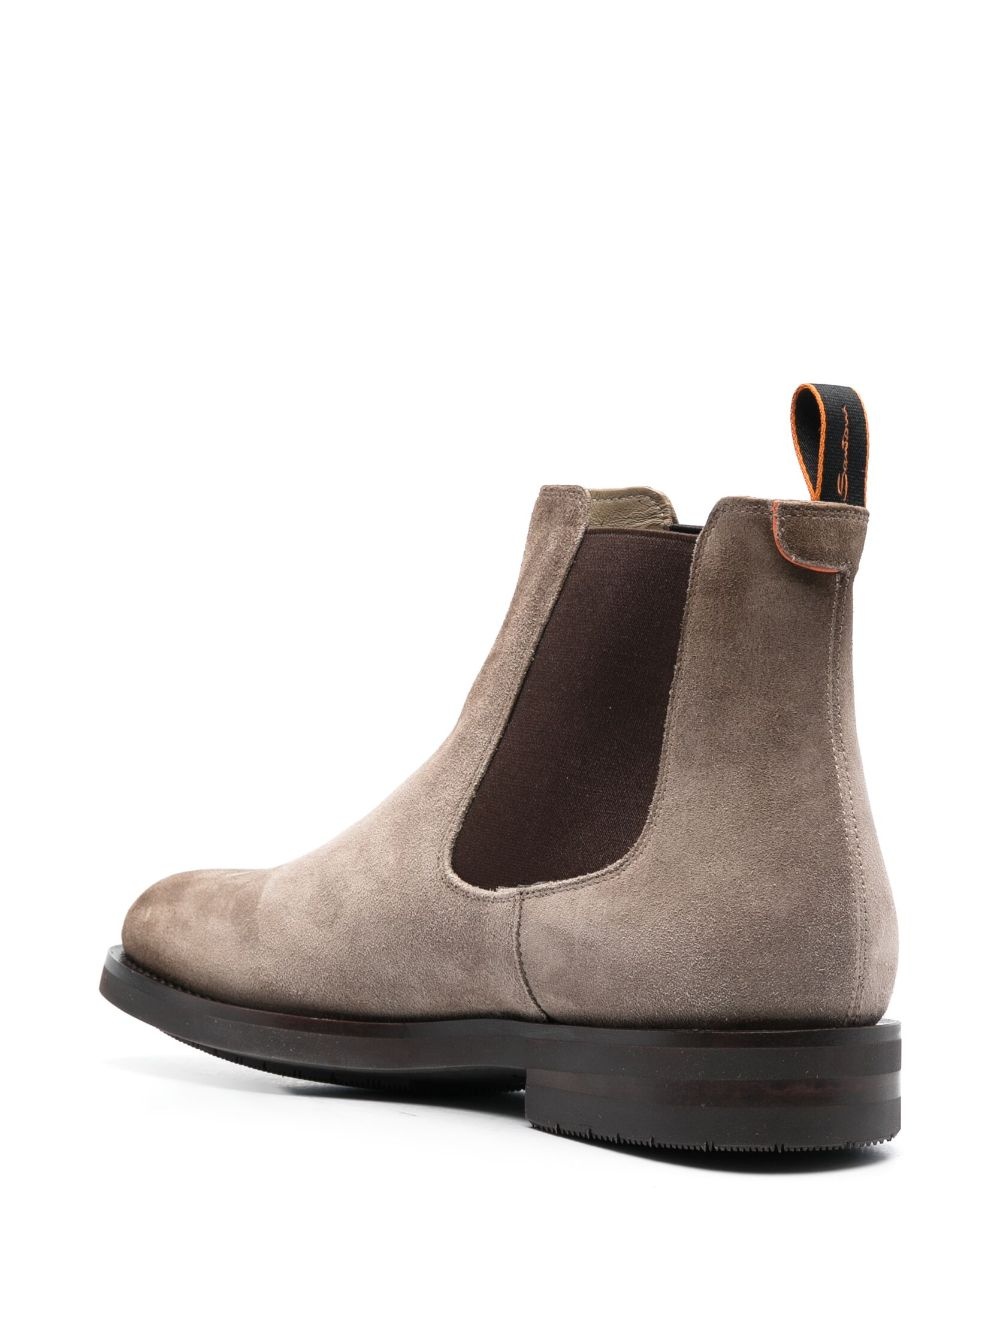 round-toe suede ankle boots - 3